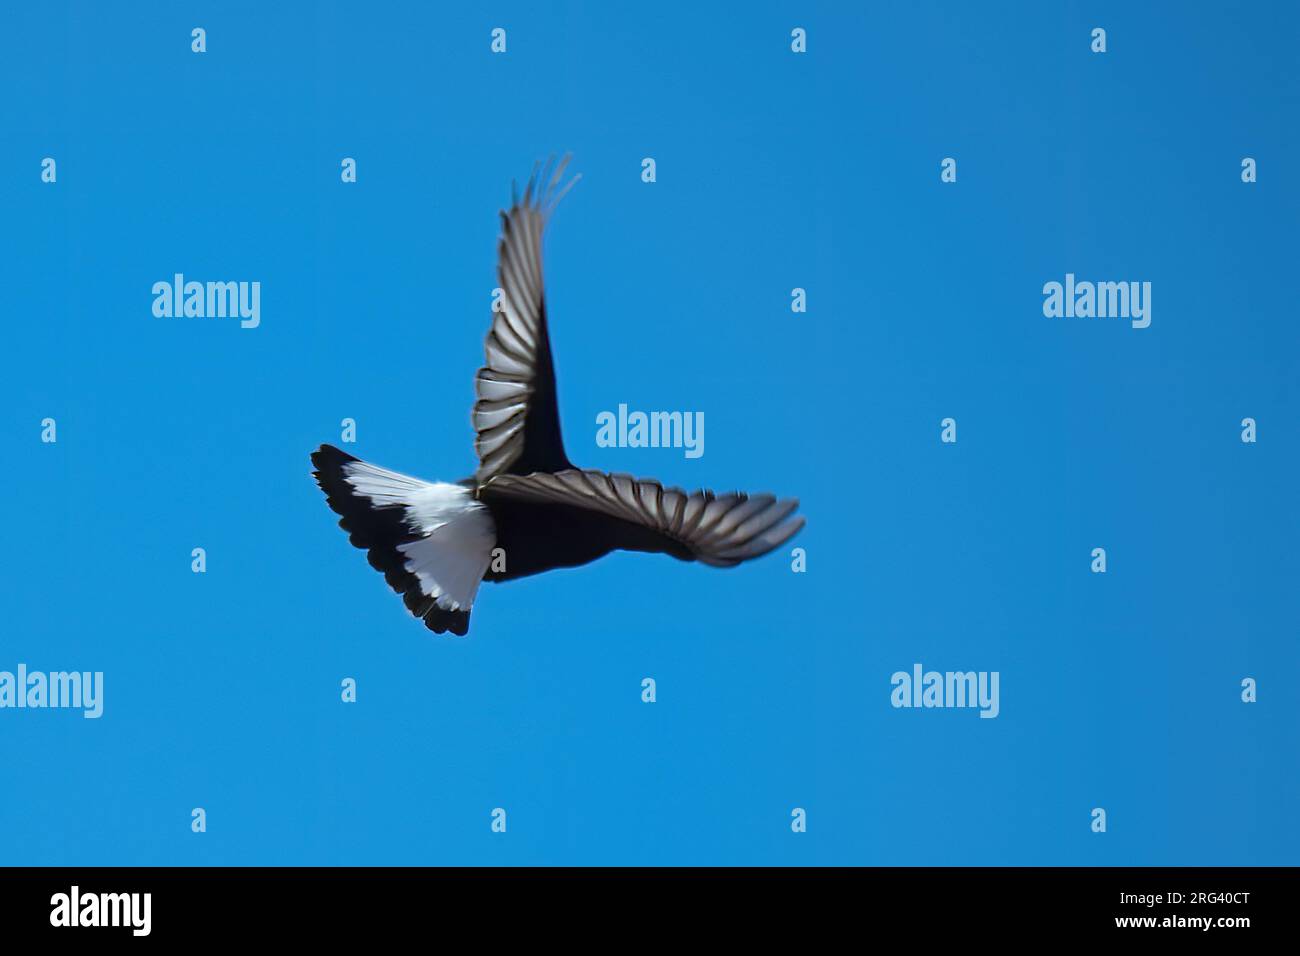 Black Wheatear (Oenanthe leucura), bird seen from behind showing back and tail pattern in flight against blue sky. Stock Photo